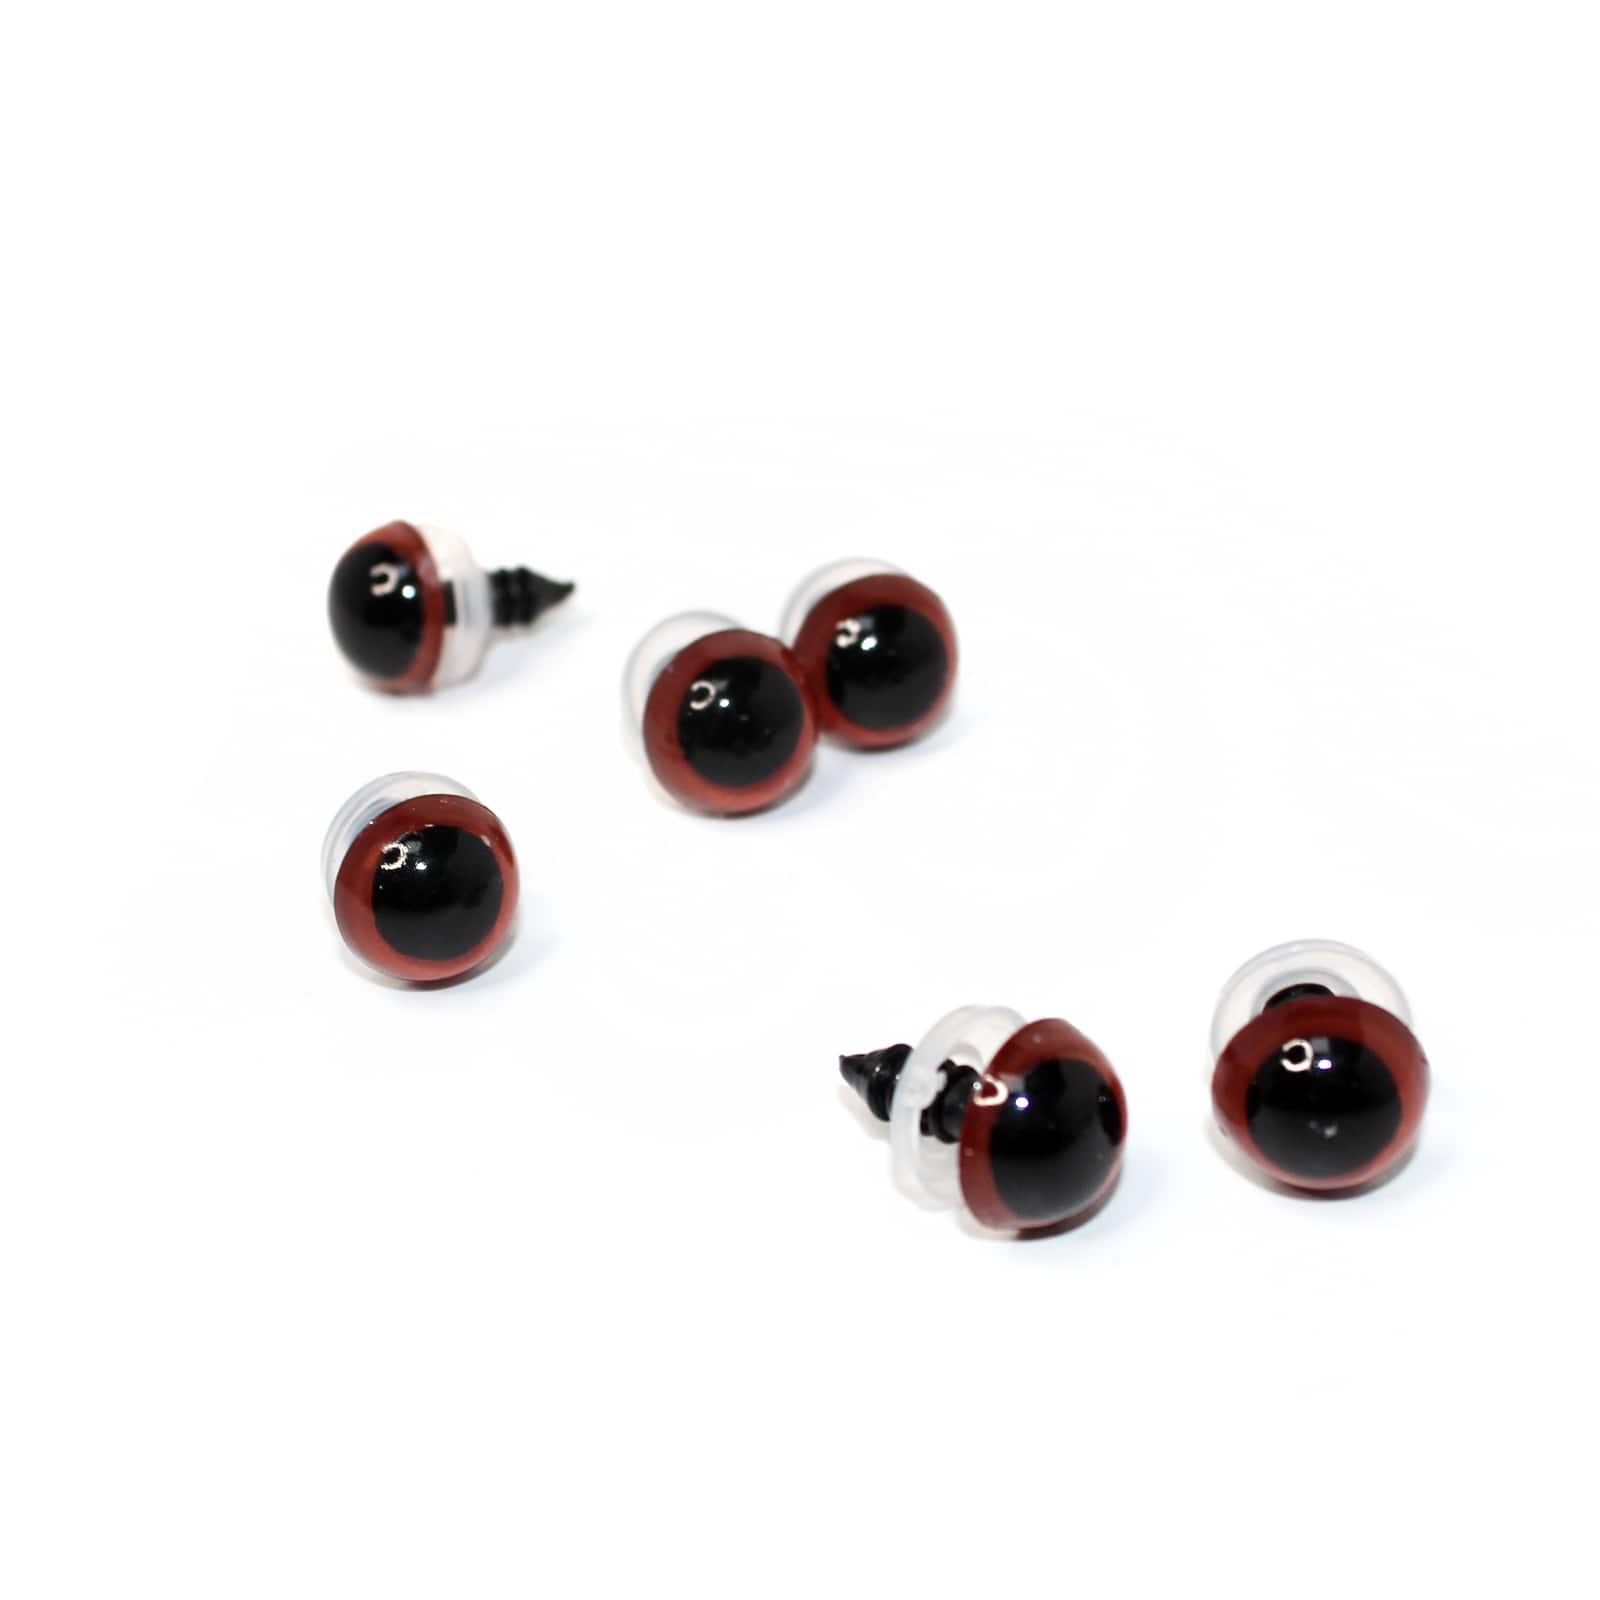 Loops & Threads 12mm Craft Eyes with Plastic Washers - Each